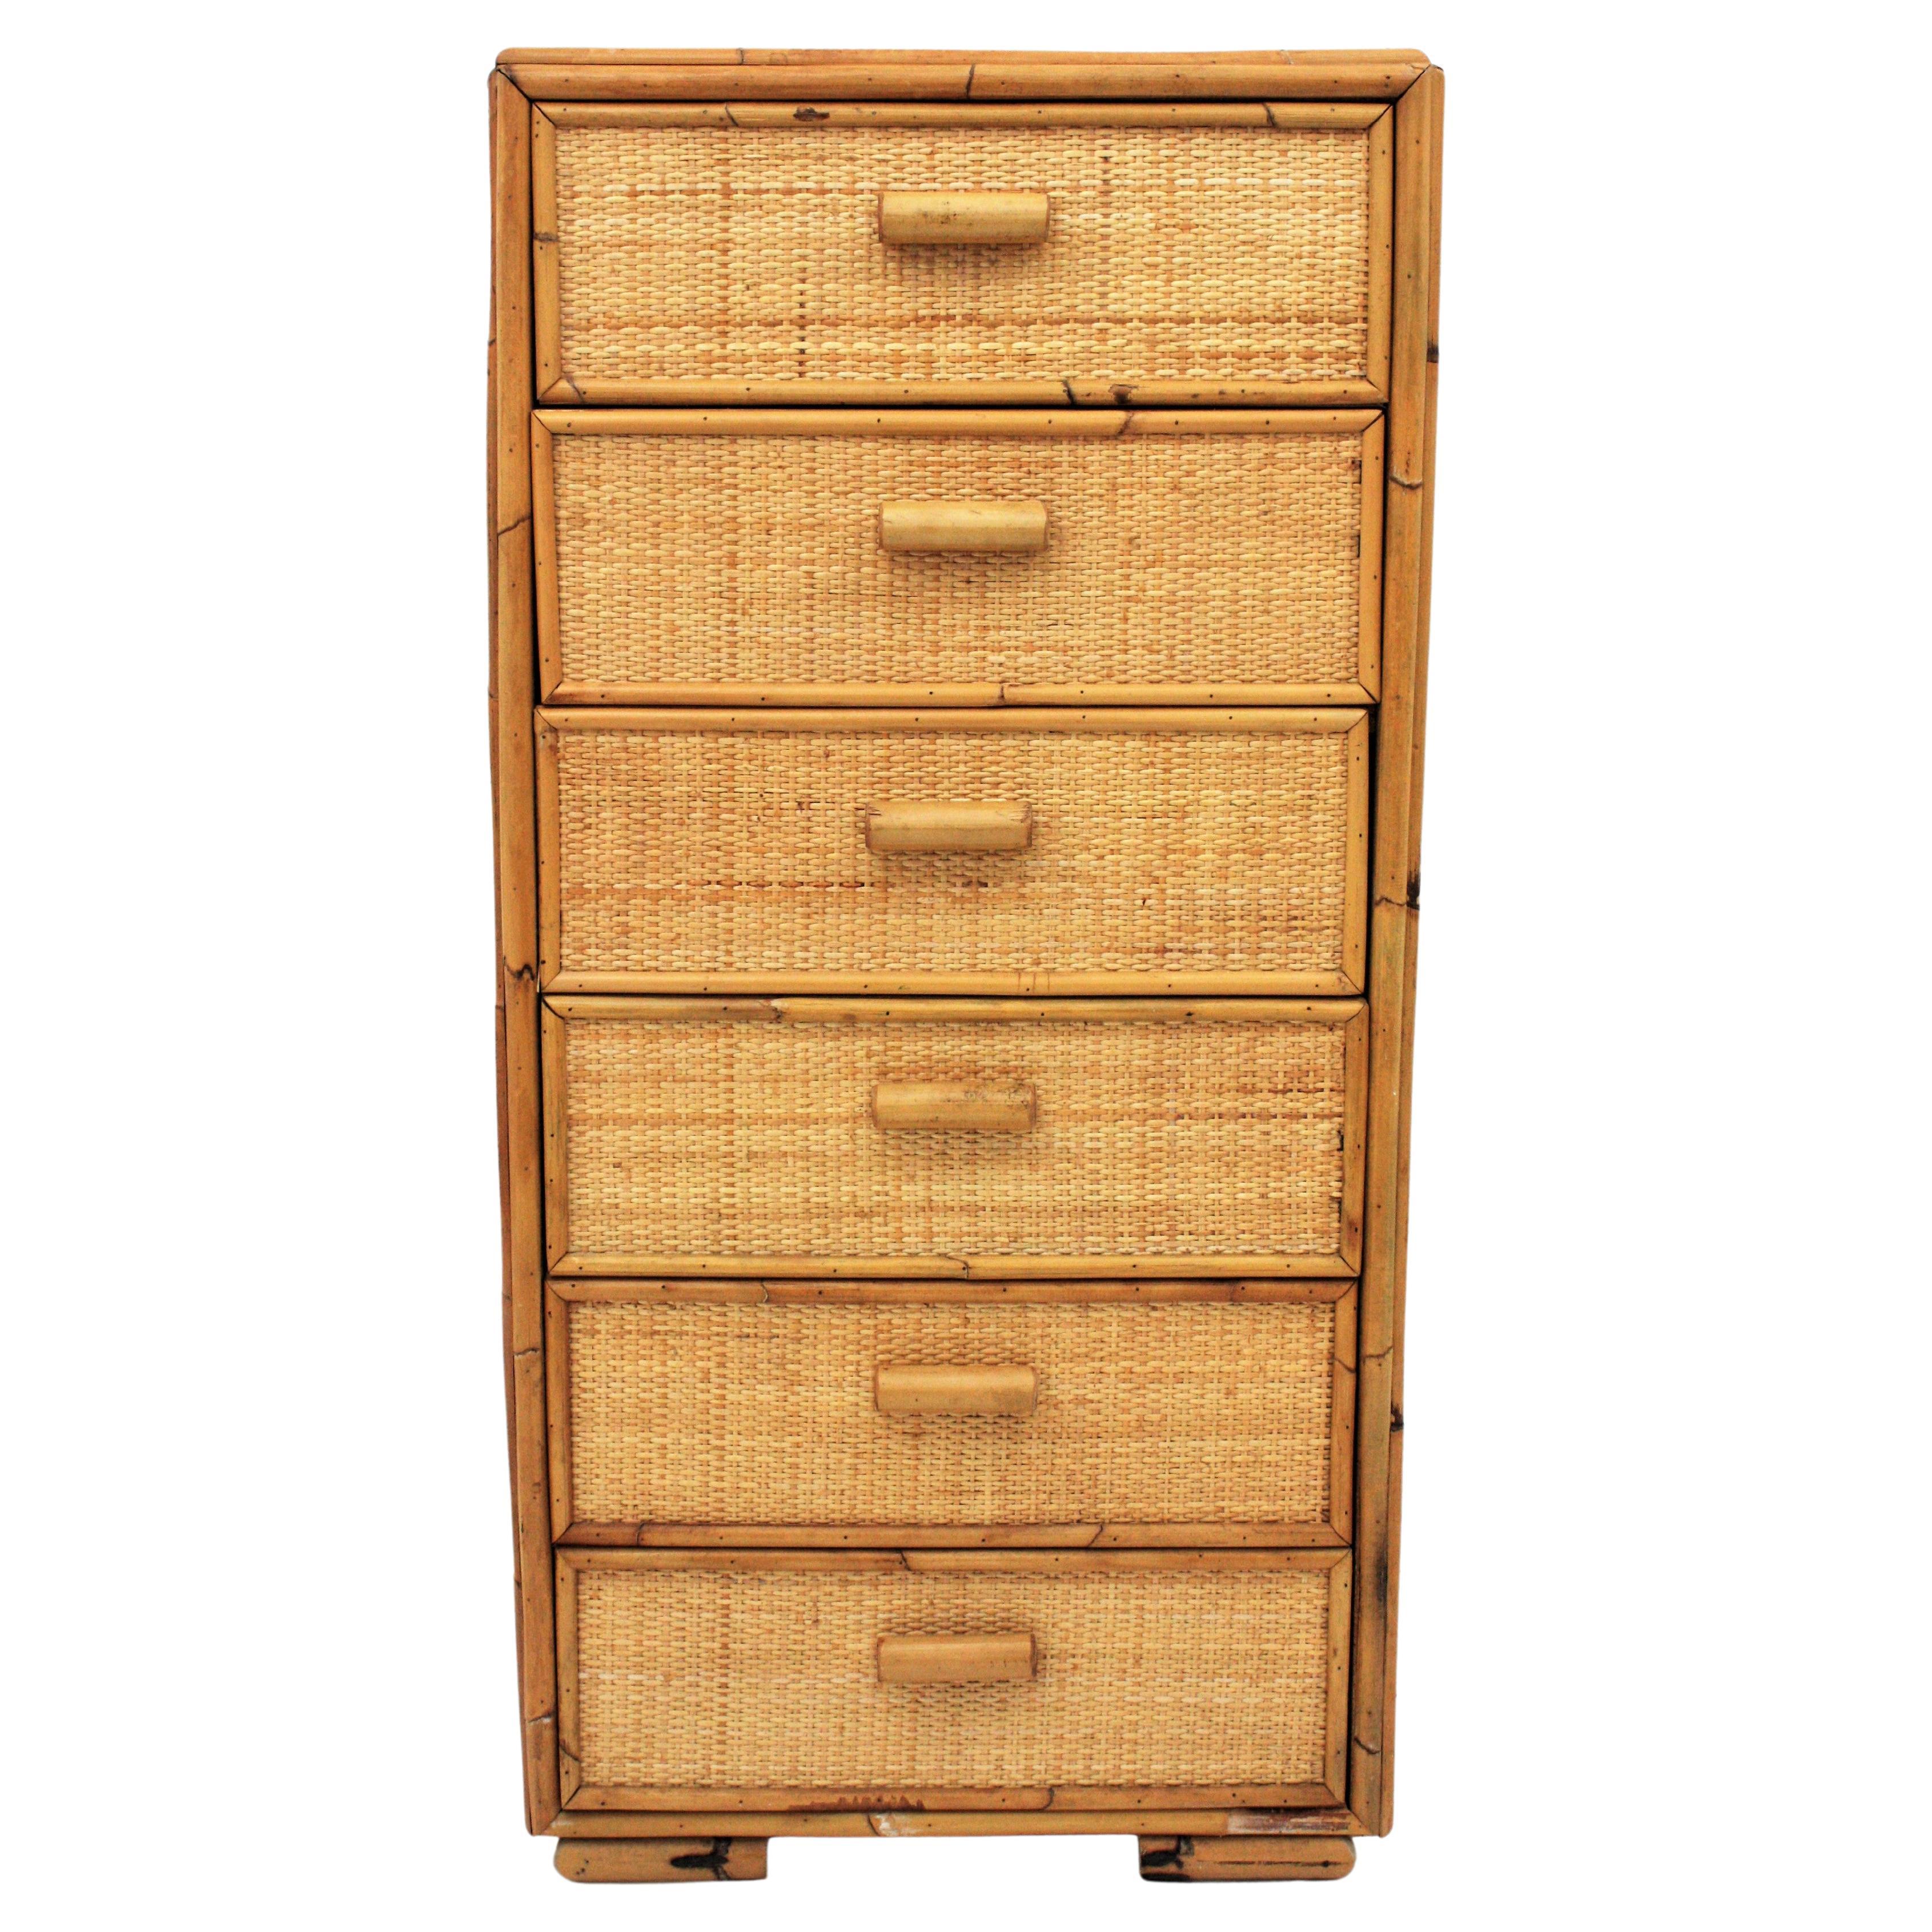 Rattan woven wicker six-drawer tall boy dresser or slim chest of drawers. Spain, 1960s

This beautiful rattan dresser has a bamboo and rattan structure with six drawers all covered by rattan weave accented by rattan pulls.
It will be a nice